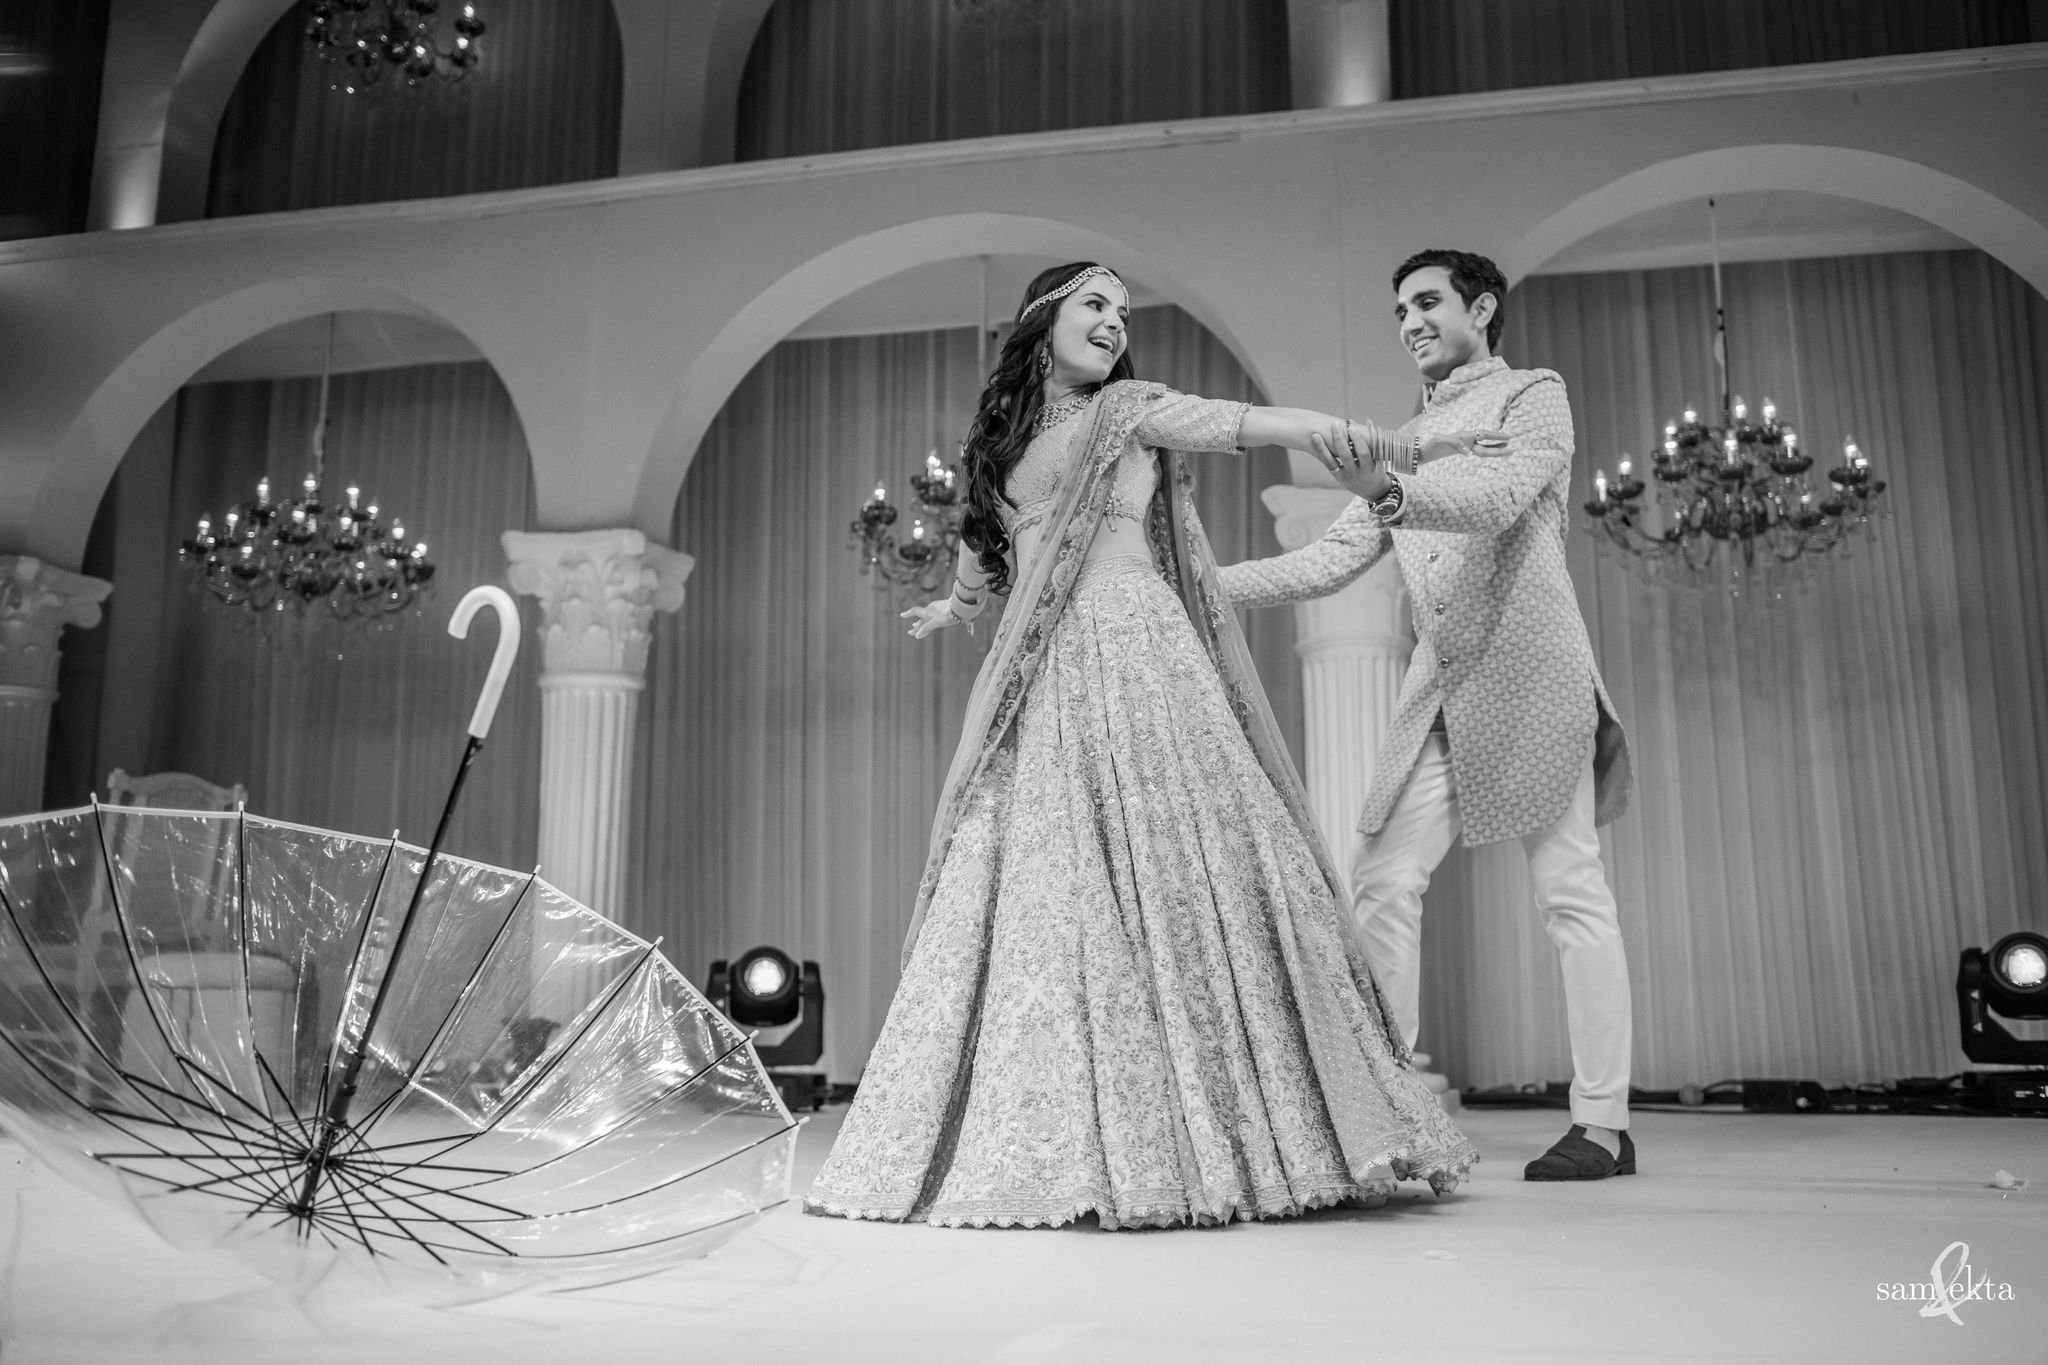 Saba &amp; Ishaan had their first dance as a married couple, and it was as magical as we expected it to be